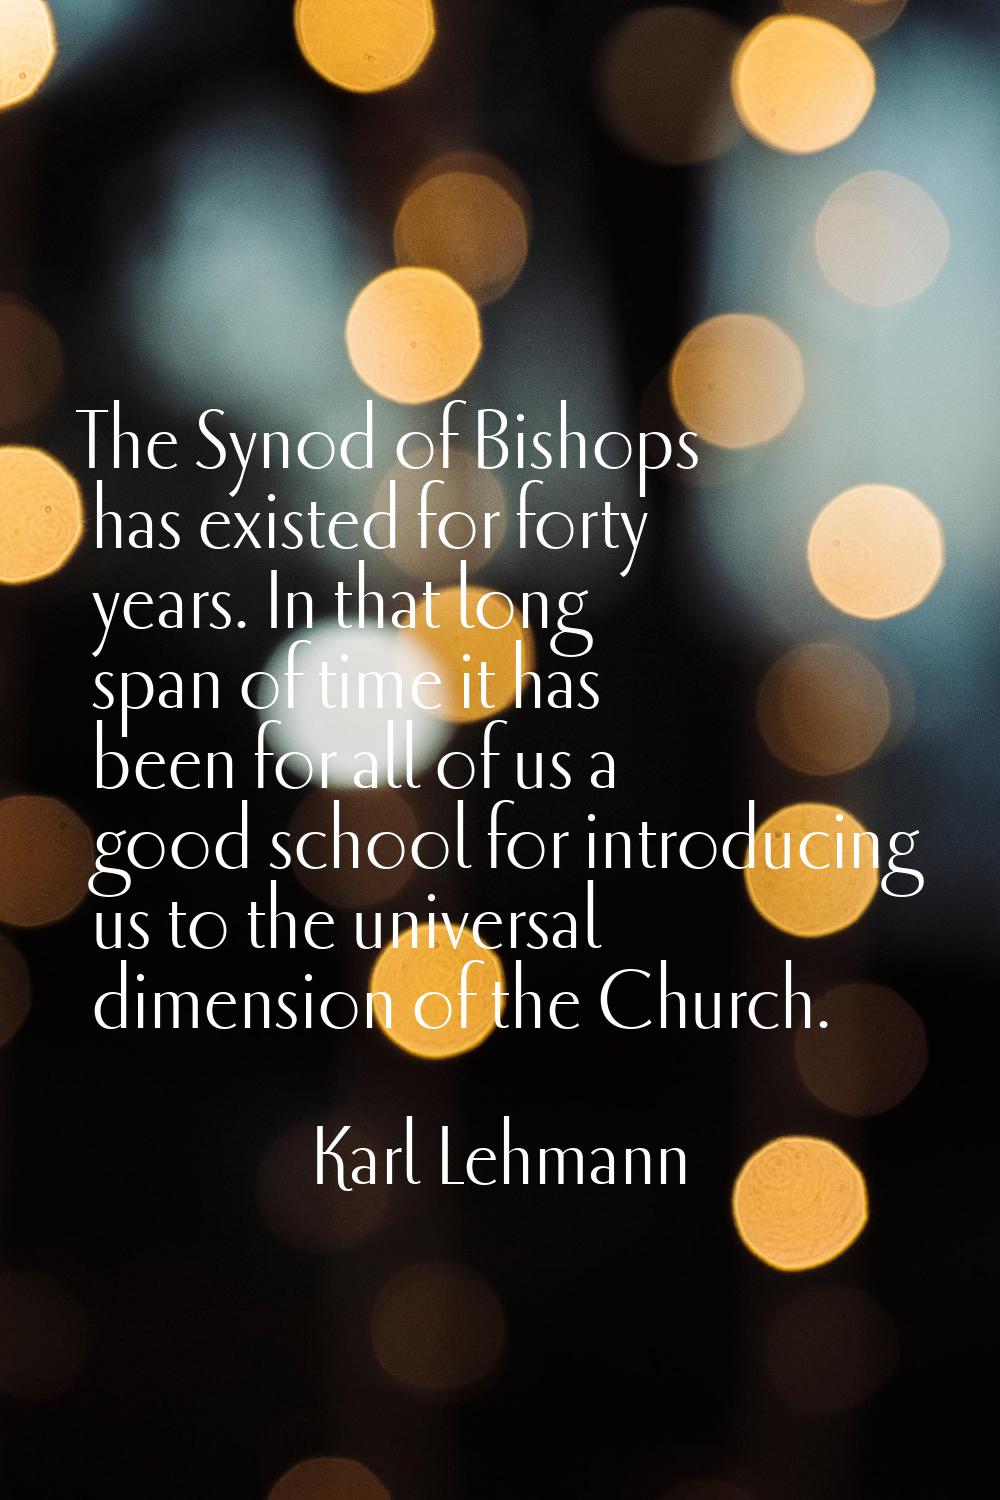 The Synod of Bishops has existed for forty years. In that long span of time it has been for all of 